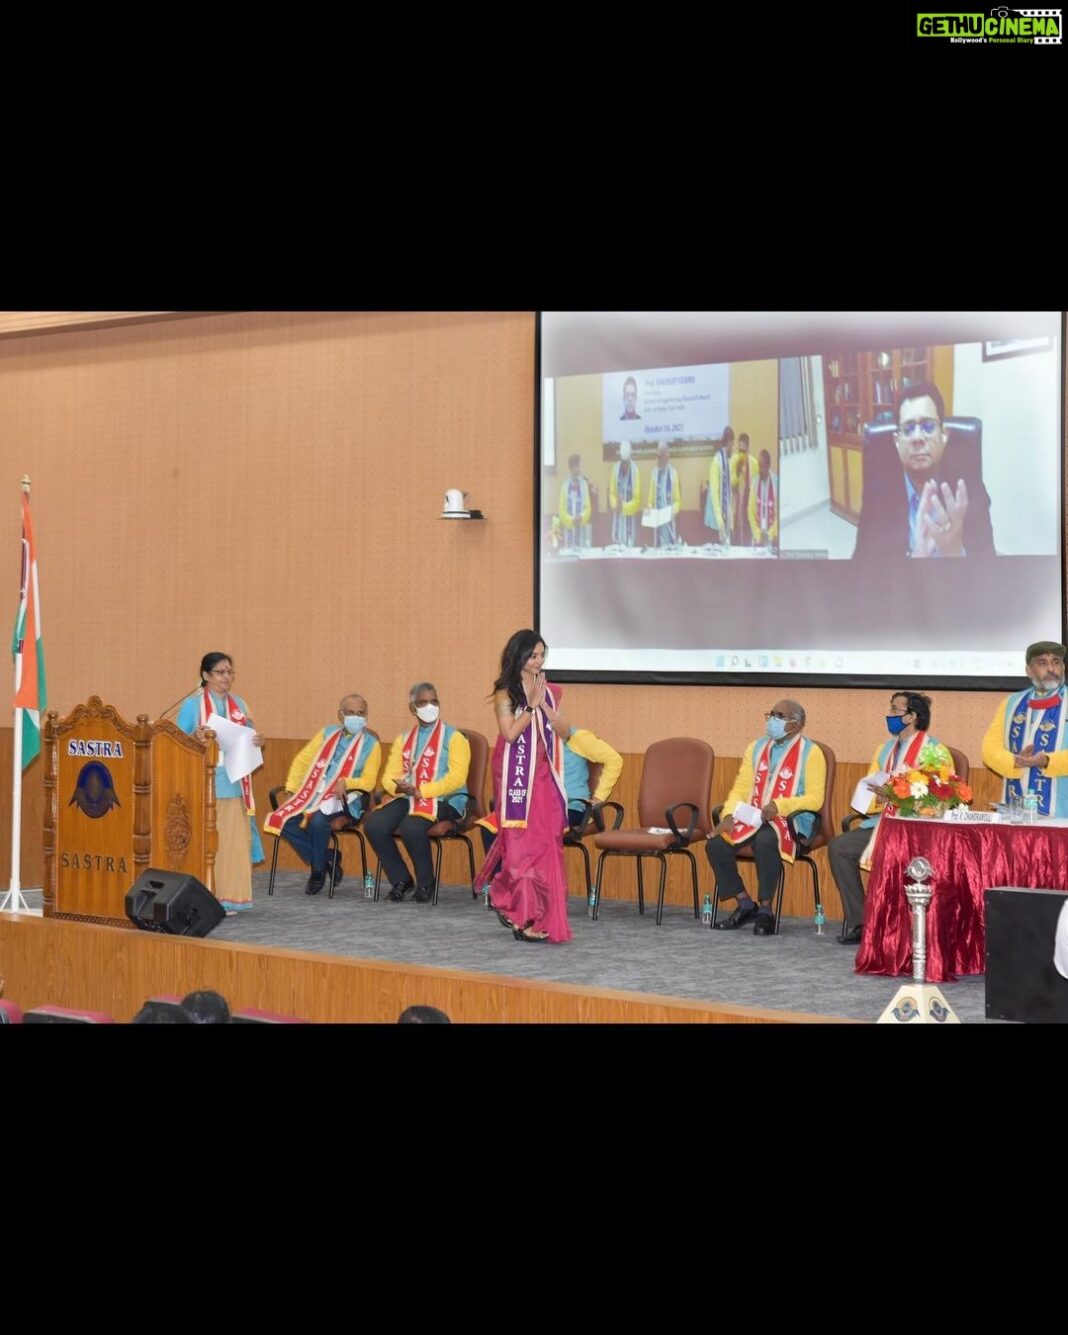 Vidhya Instagram - An emotional convocation ceremony and celebration: Holding a Doctorate degree in Stem cell biology (specialized in Ocular Stem cells) - An emotional journey of years of hard work, patience, perseverance and determination. I thank my Gurus, my Guide, Co-guide, Scientists, Clinicians and all who have guided and supported me throughout the journey in making my dream come true. I thank Sankara Nethralaya Eye hospital, Sastra University and all my dear friends and colleagues. Being an actor and a scientist simultaneously was extremely challenging, but at the end of the day, having a doctorate degree is worth all the pain, hard work, sacrifices and sleepless nights. While sharing these pics, i would like to inform my friends and well wishers that i have been offered a post-doc Scientist position in the US and will be moving next year. Seeking all your blessings and wishes as always. I'm forever grateful for all your love and support🙏 #vidyapradeep